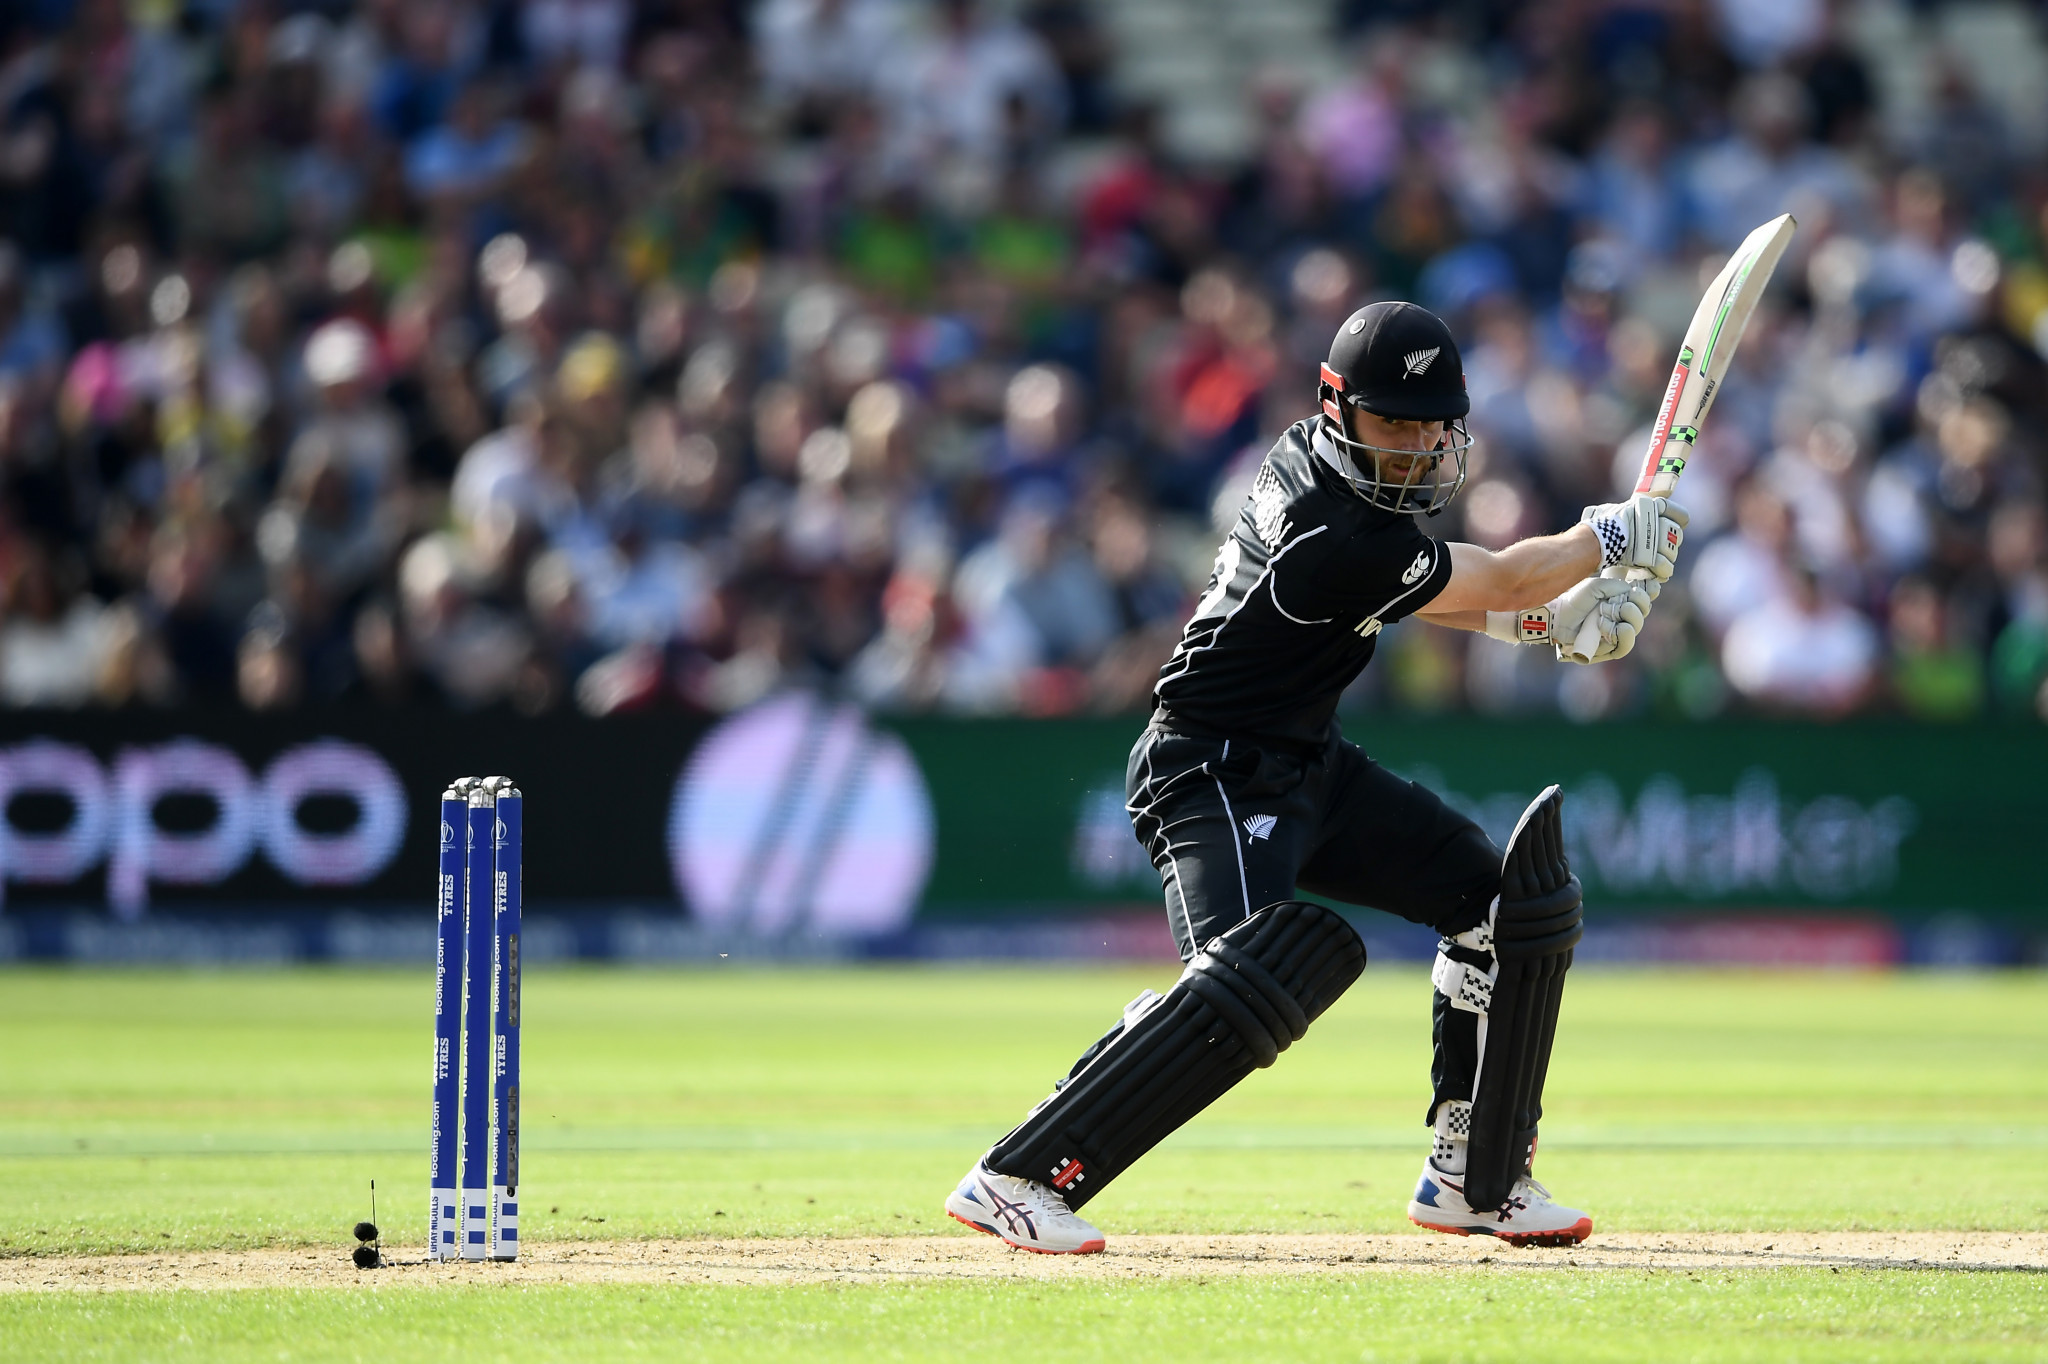 New Zealand captain Kane Williamson steered his side to a tense four-wicket victory over South Africa at the ICC Men's World Cup today ©Getty Images